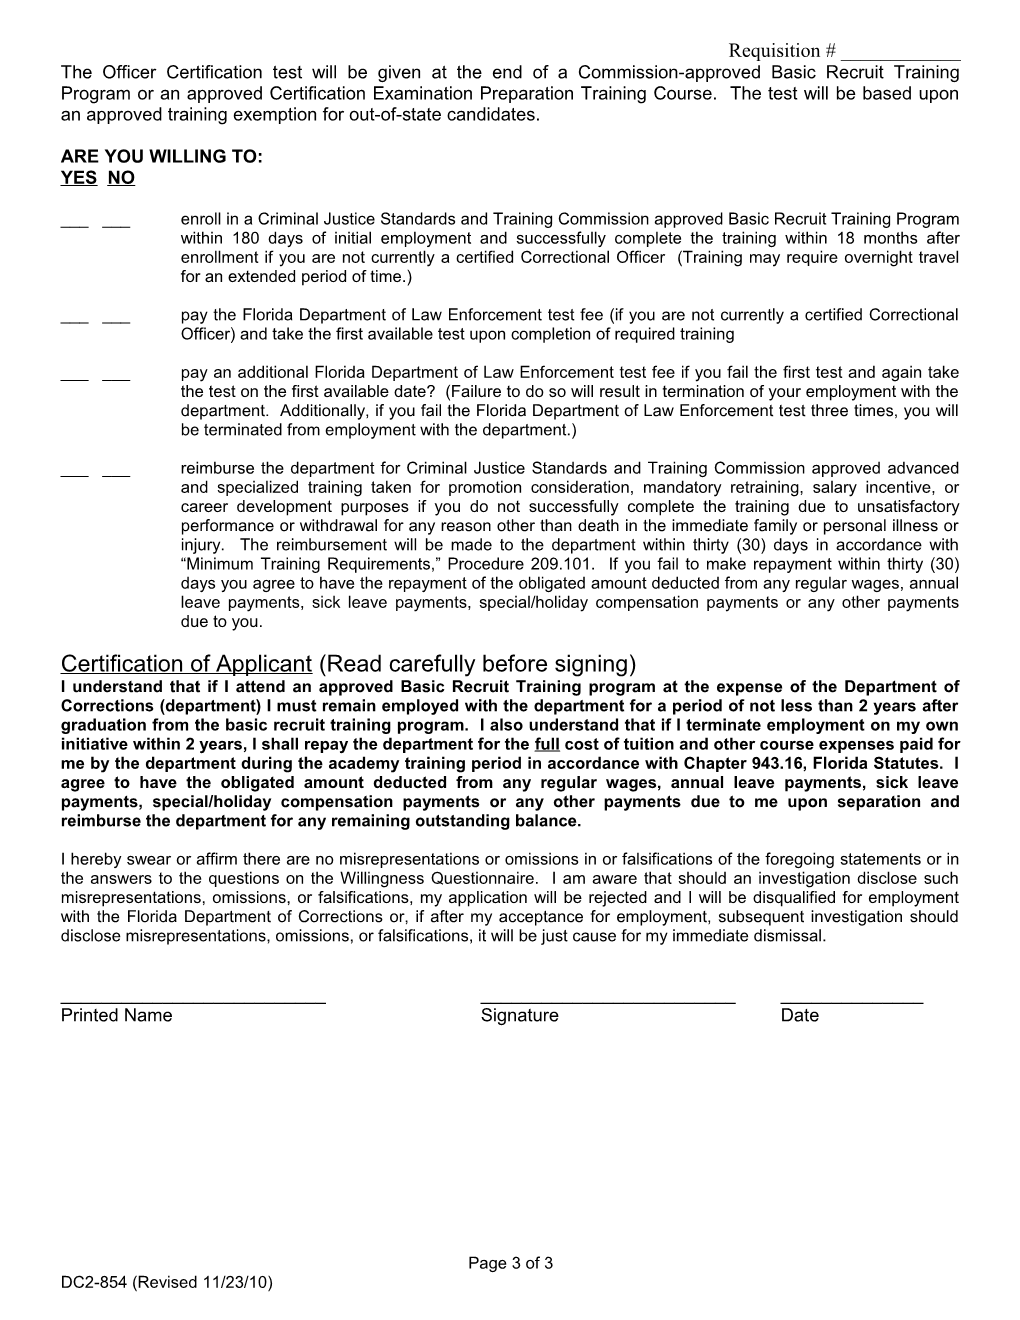 DC2-854 Correctional Officer Willingness Questionnaire (Revised 11/23/10)